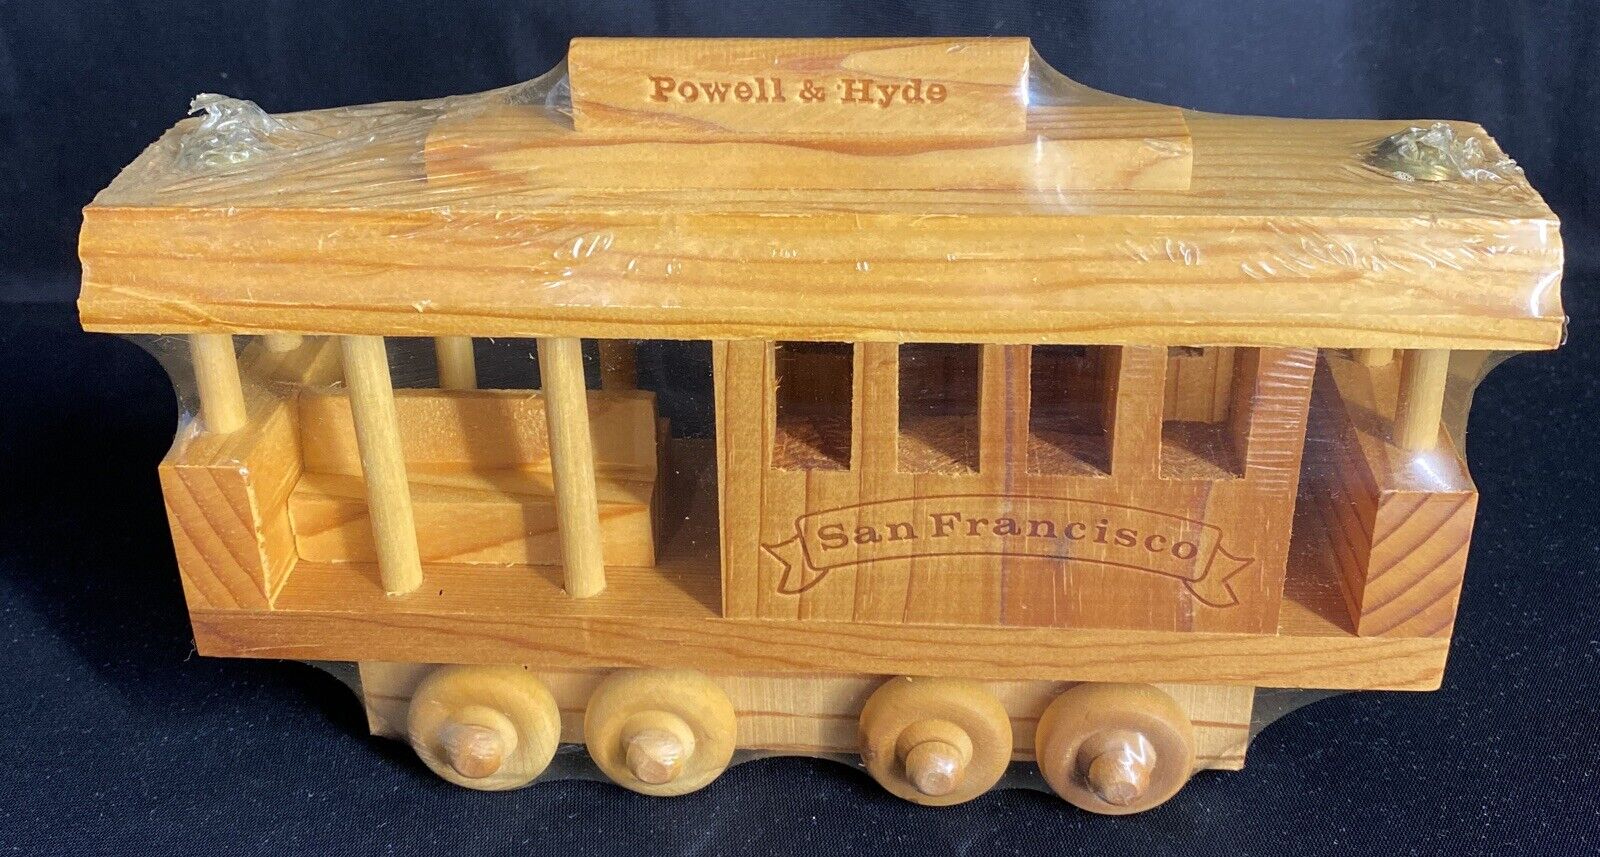 San Francisco Powell & Hyde Wooden Trolley 1984 New Old Stock Souvenir Без бренда